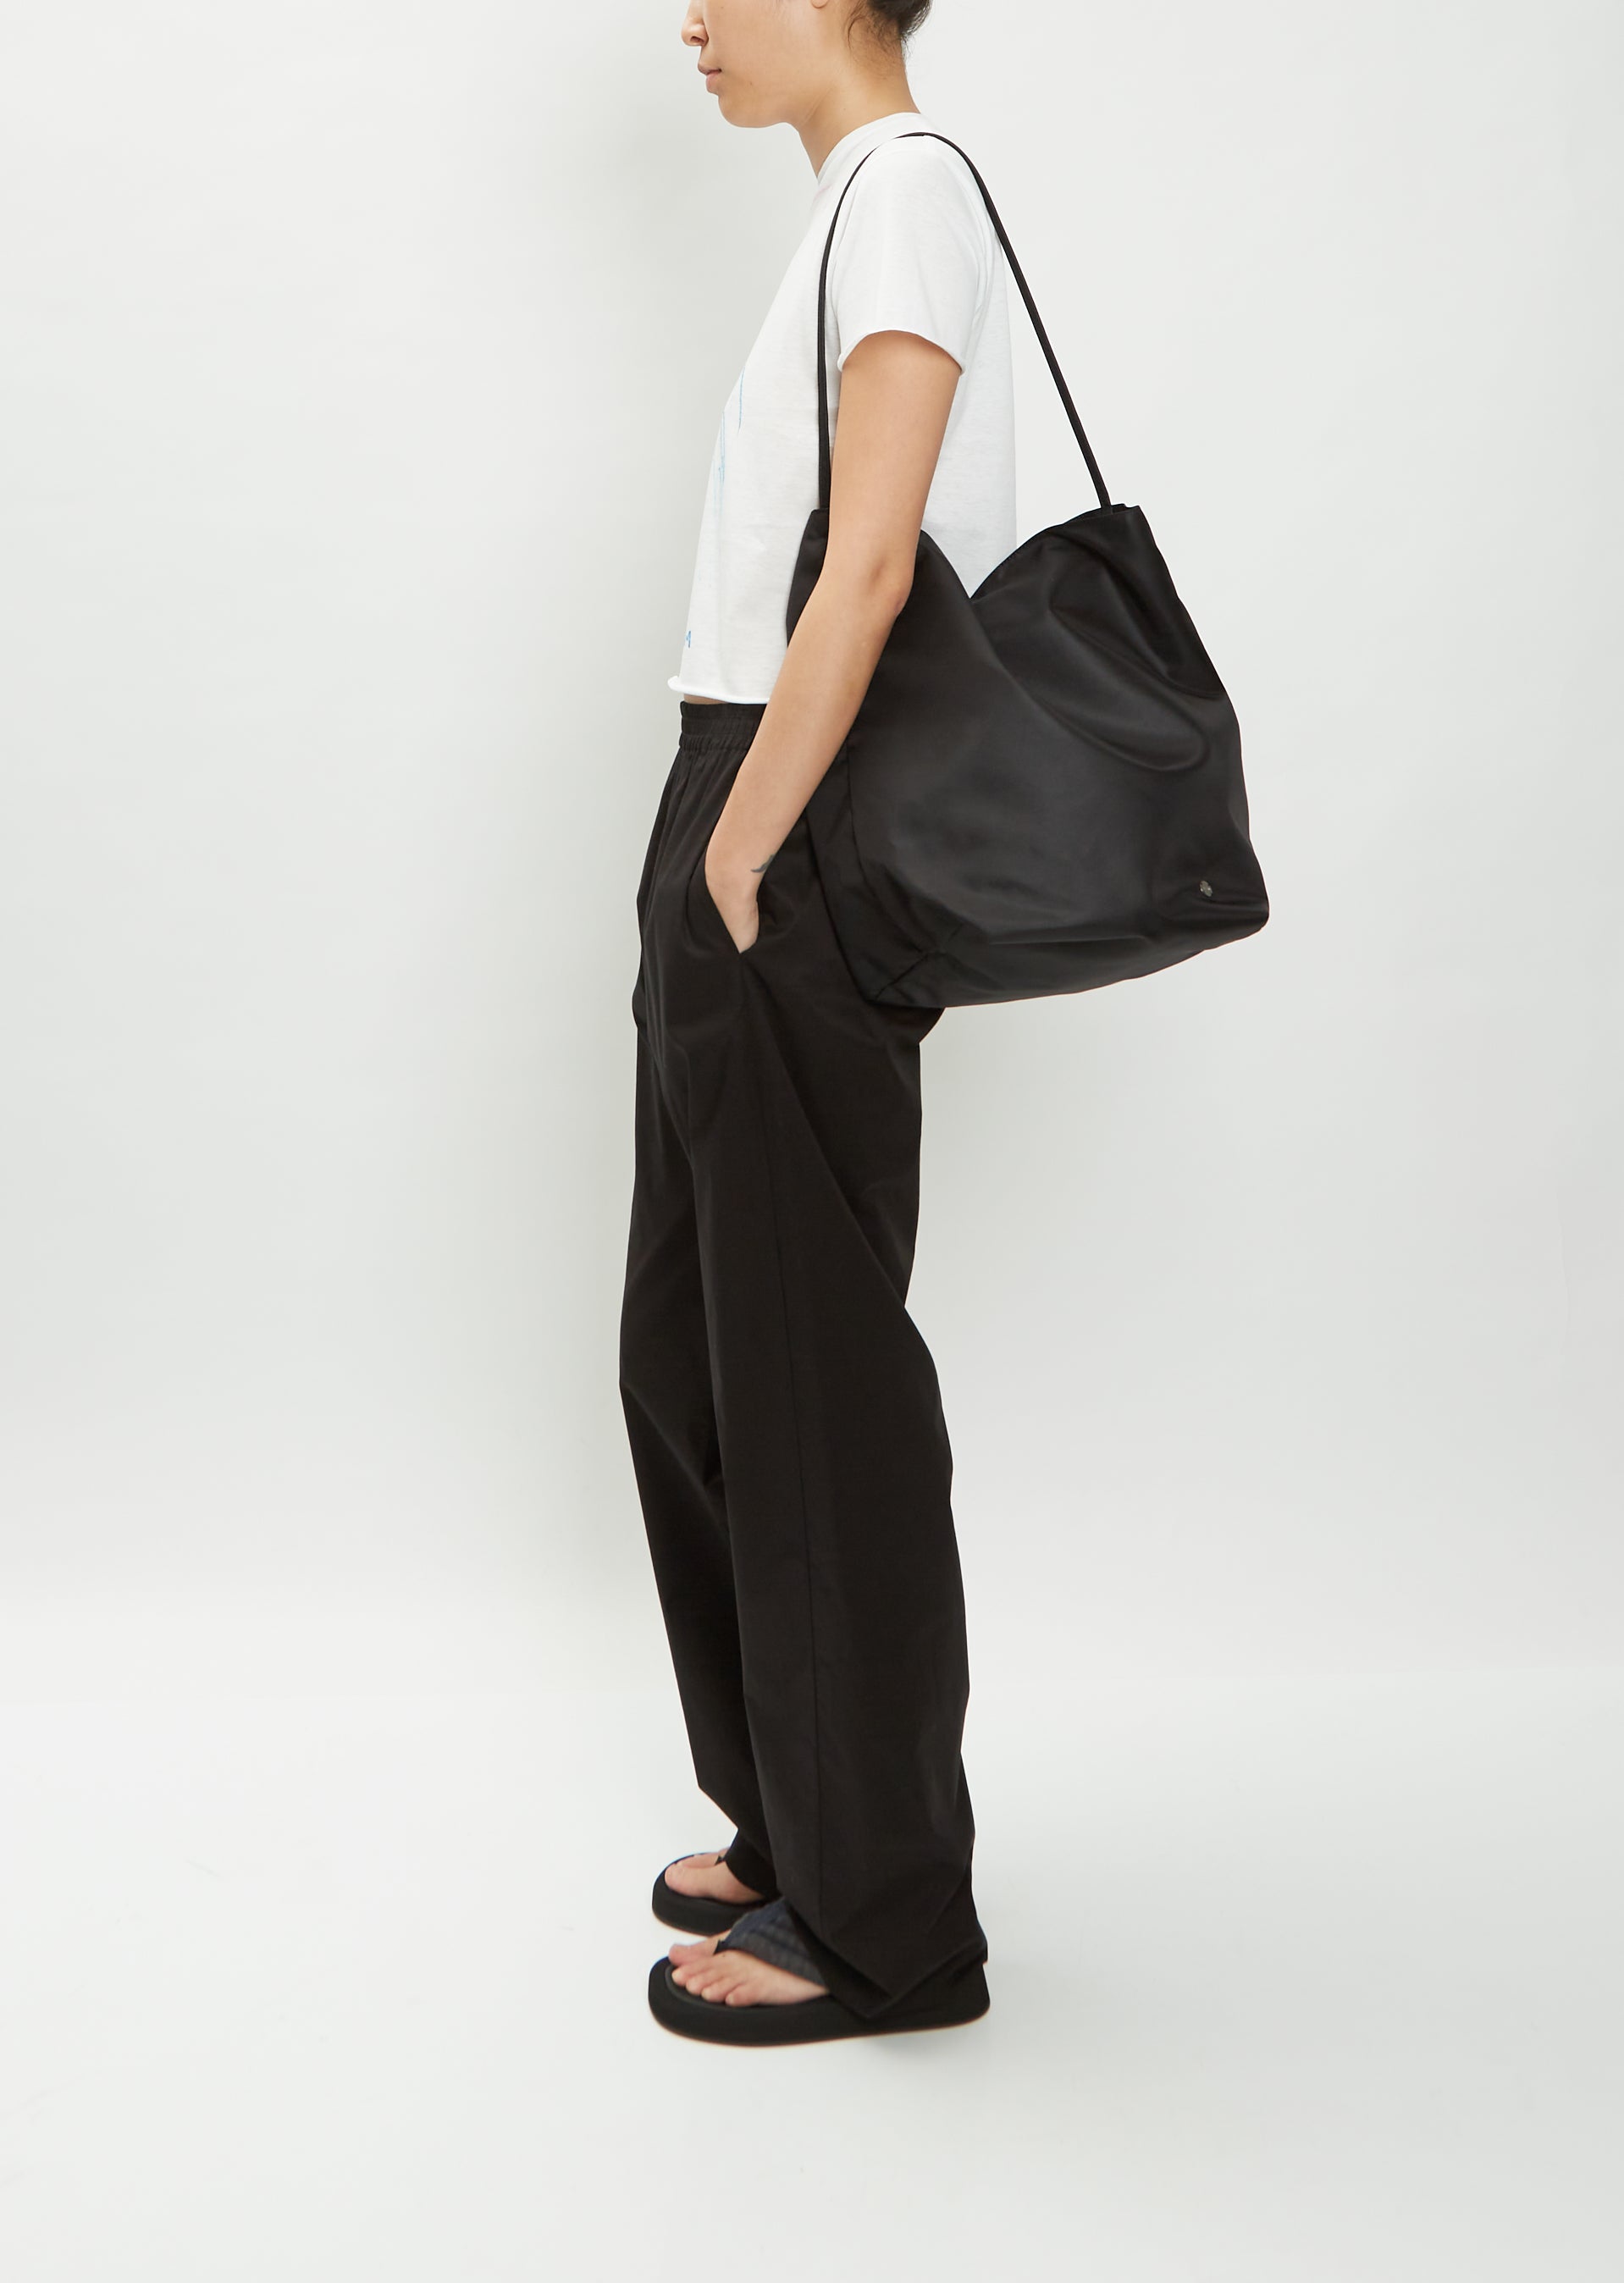 THE ROW N S Park Tote Nylon バッグ - バッグ